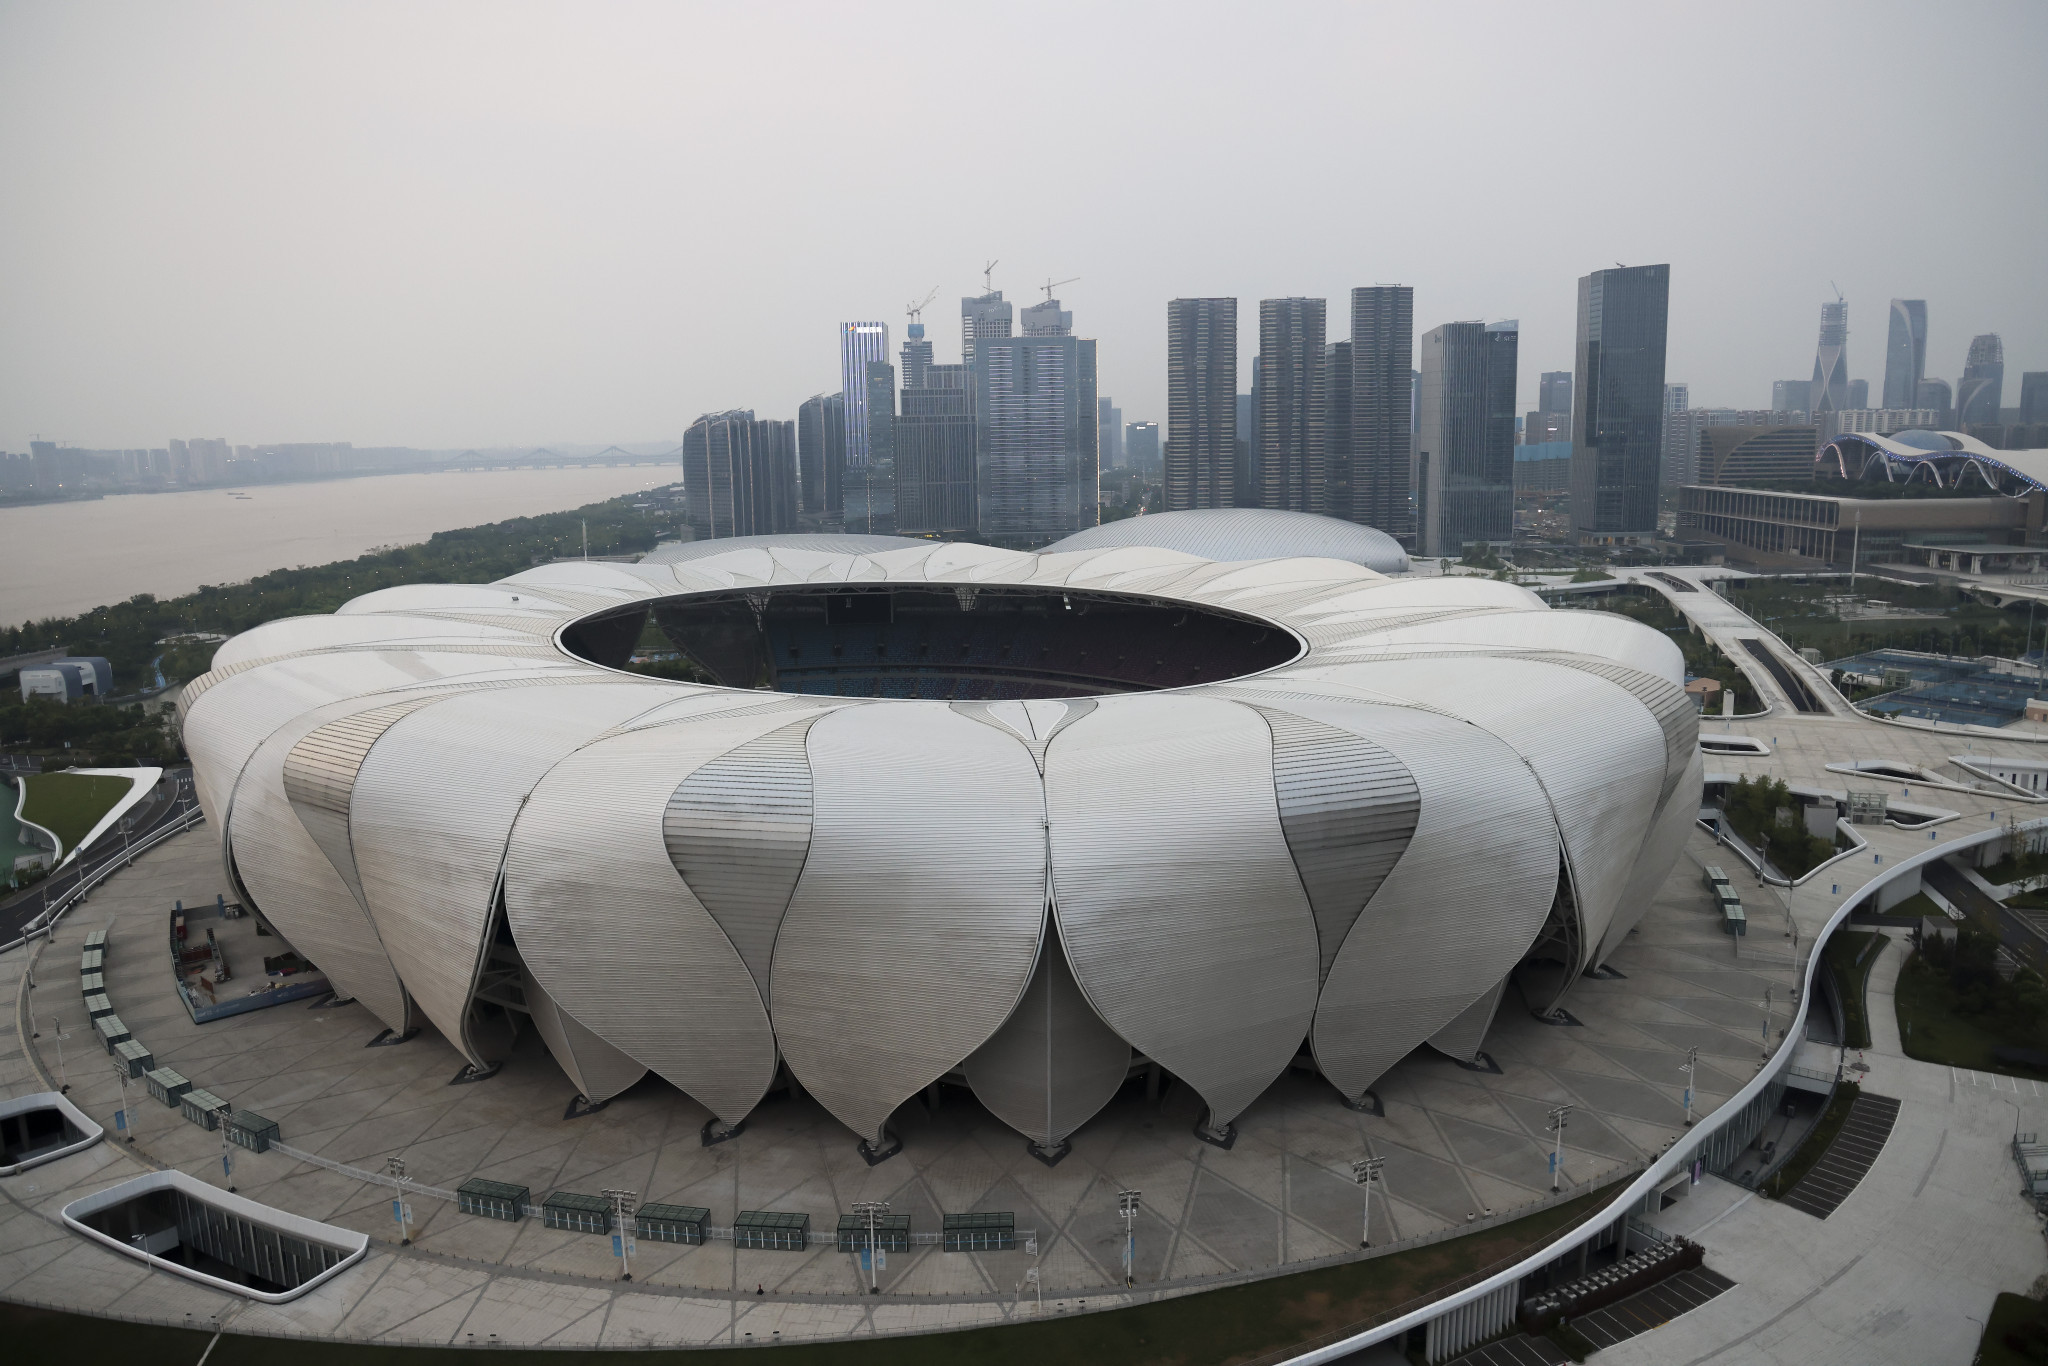 Hangzhou 2022 Opening Ceremony set to run for two hours